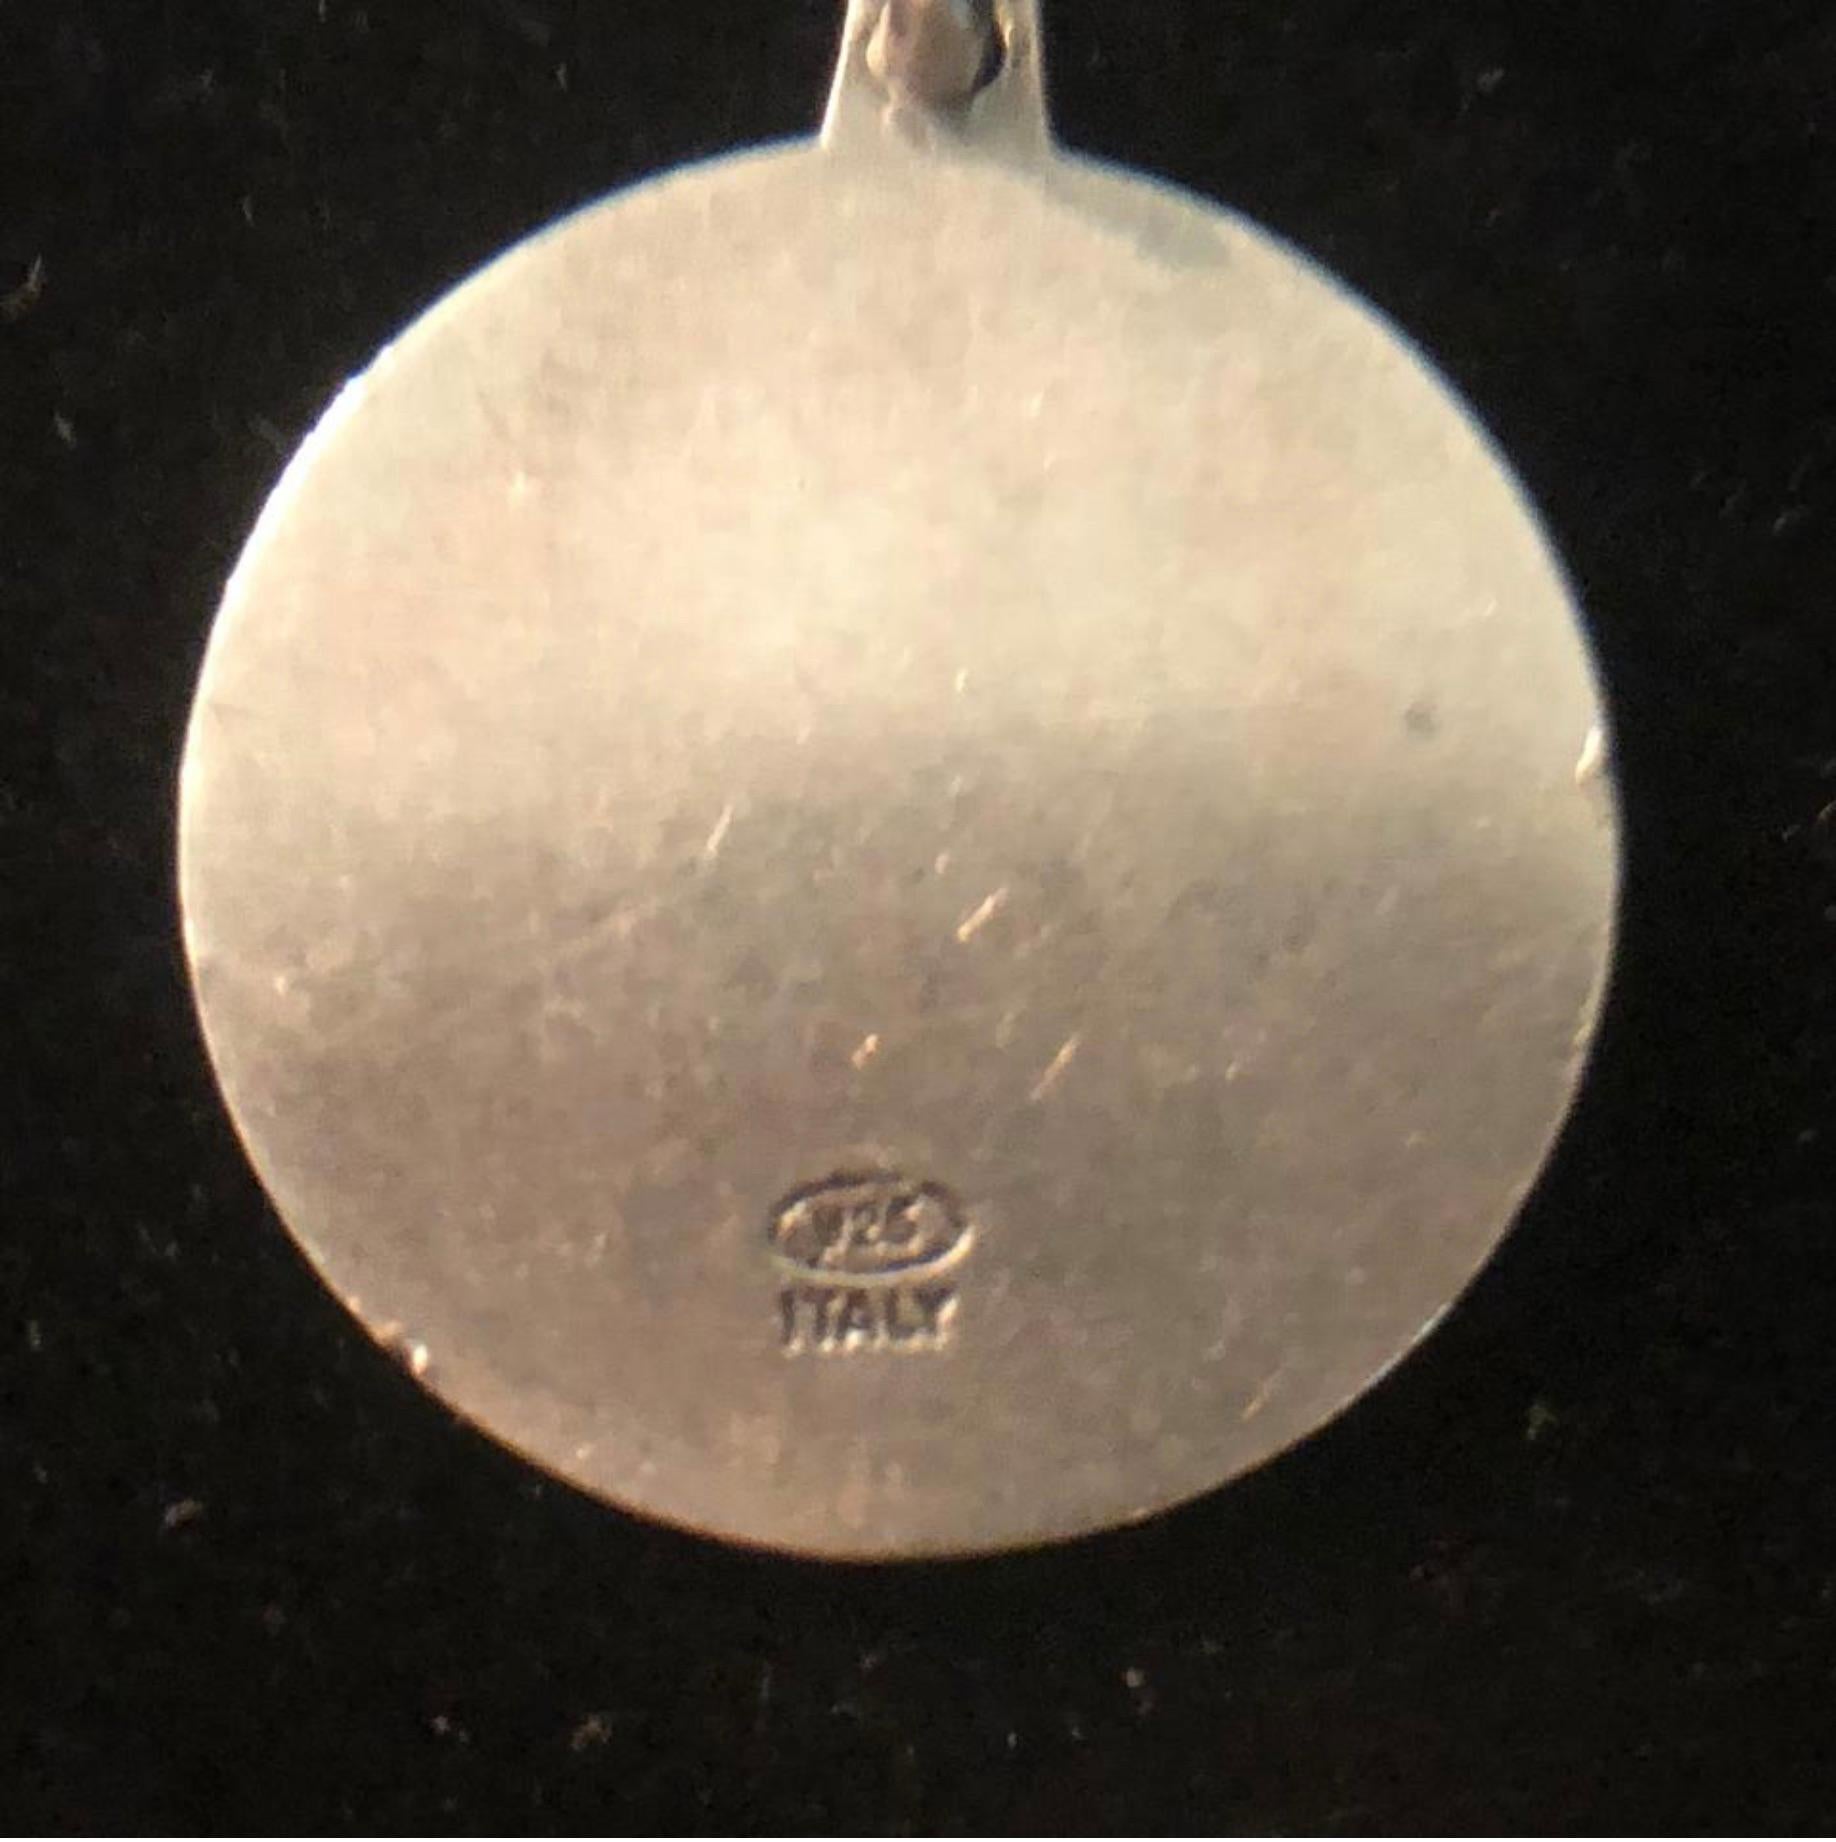 MODEL - Vintage Sterling Silver Moon with Stars Charm or Pendent

CONDITION - Exceptional!

SKU - 1935

ORIGINAL RETAIL PRICE - $100 + tax

DIMENSIONS - L.75 x H.75 x D.2

CLOSURE TYPE - Not Applicable

MATERIAL - Sterling Silver

COMES WITH - No